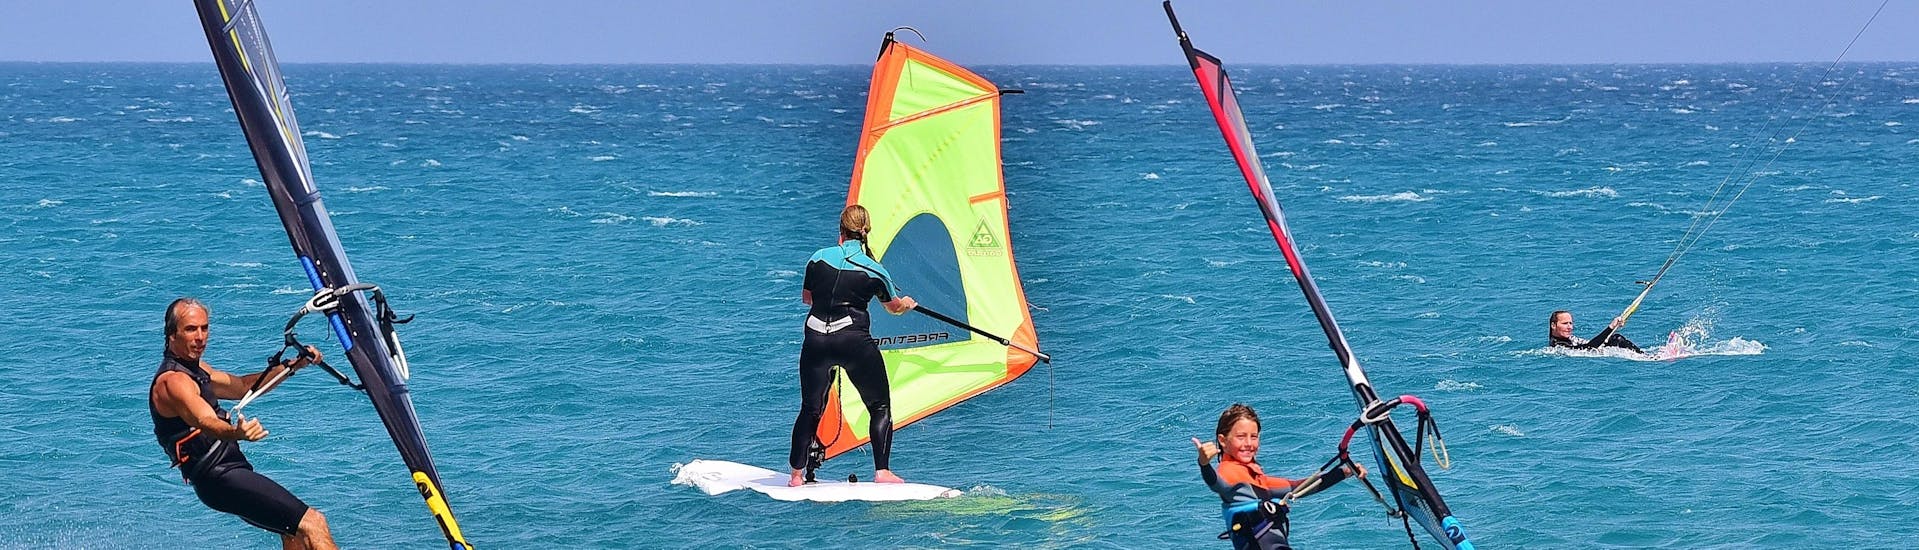 Windsurfing Lessons for Kids and Adults - Beginner with Matas Bay Surf School - Hero image